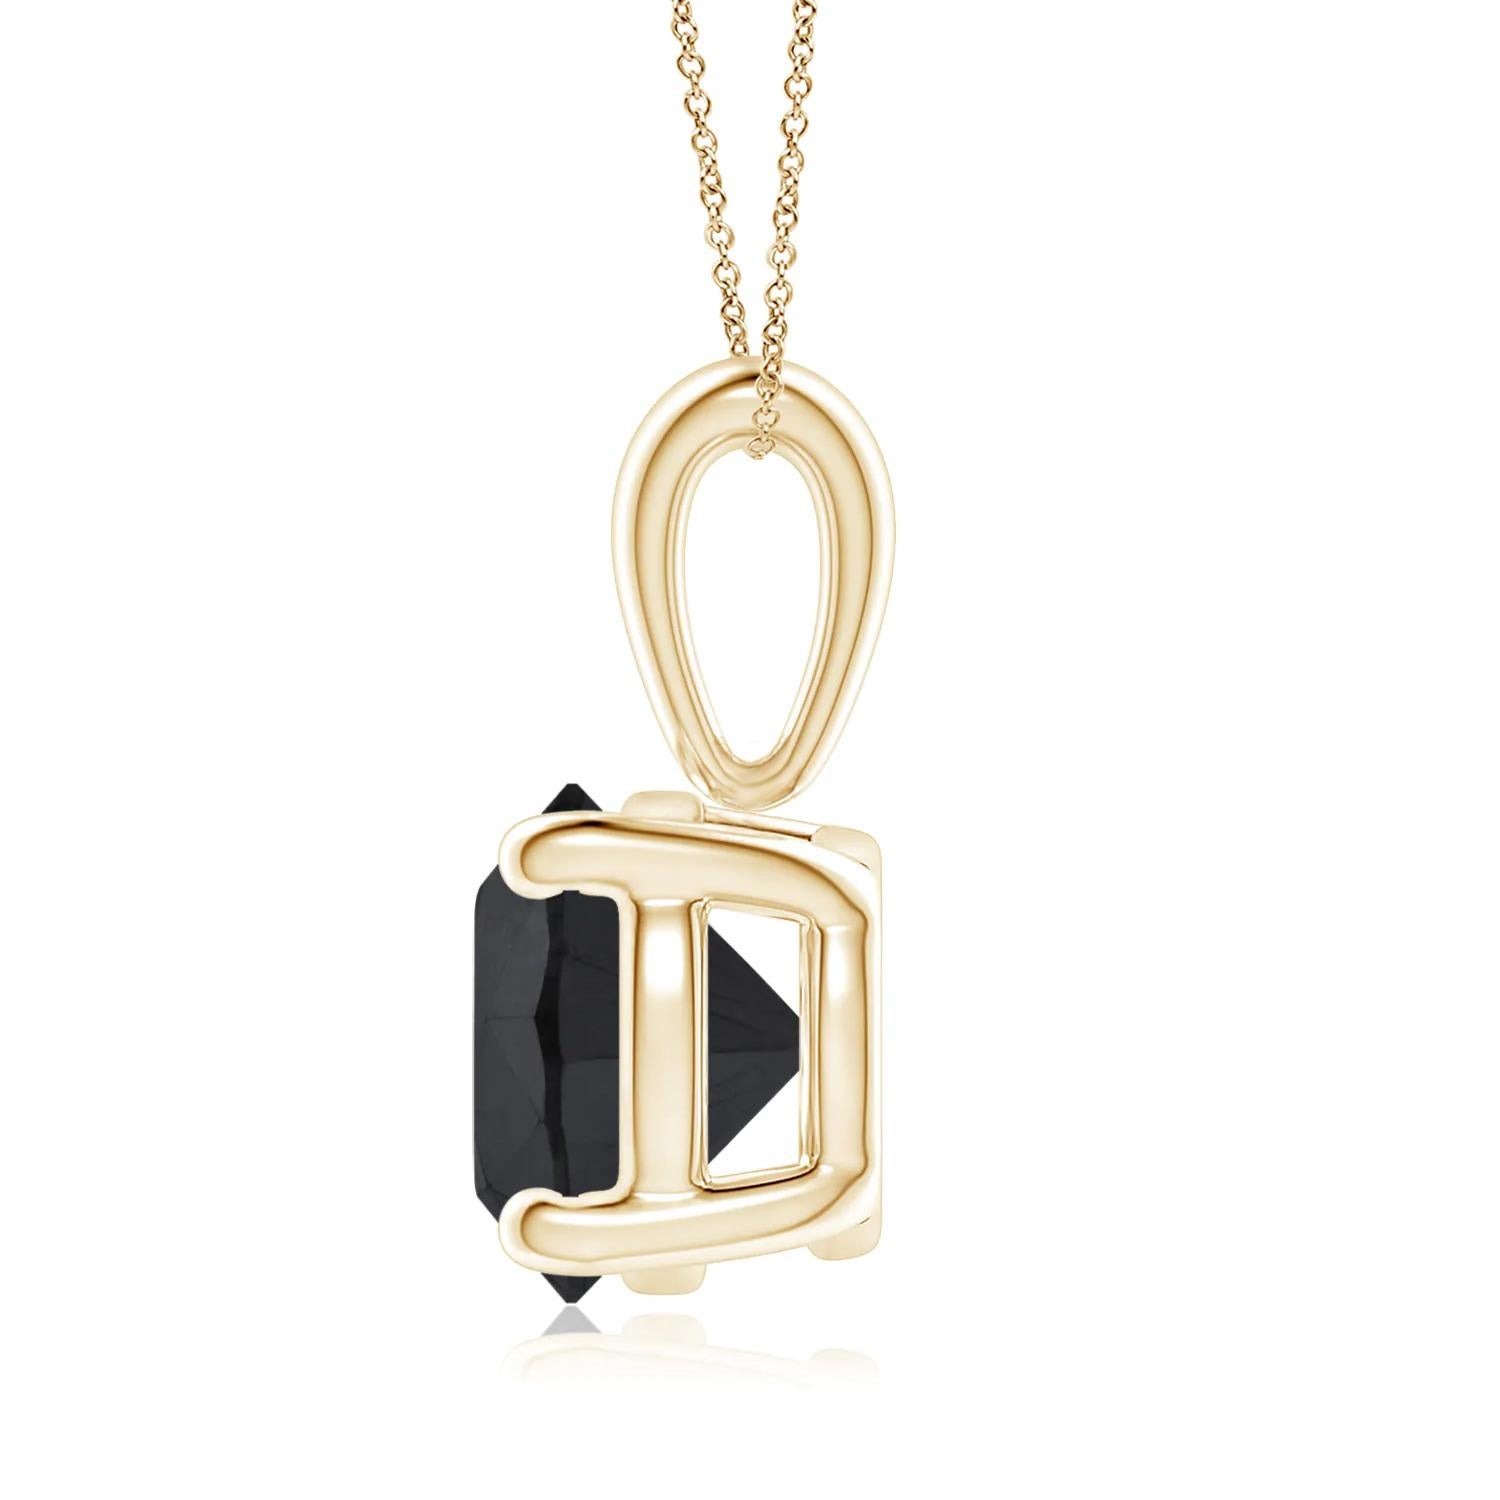 Surprise a special woman in your life with this breathtaking, statement hand crafted solitaire black diamond necklace. This eye-catching pendant necklace features a 1.29 carat round cut black diamond, measuring 6.70 x 6.71 x 4.06 mm set in 14k